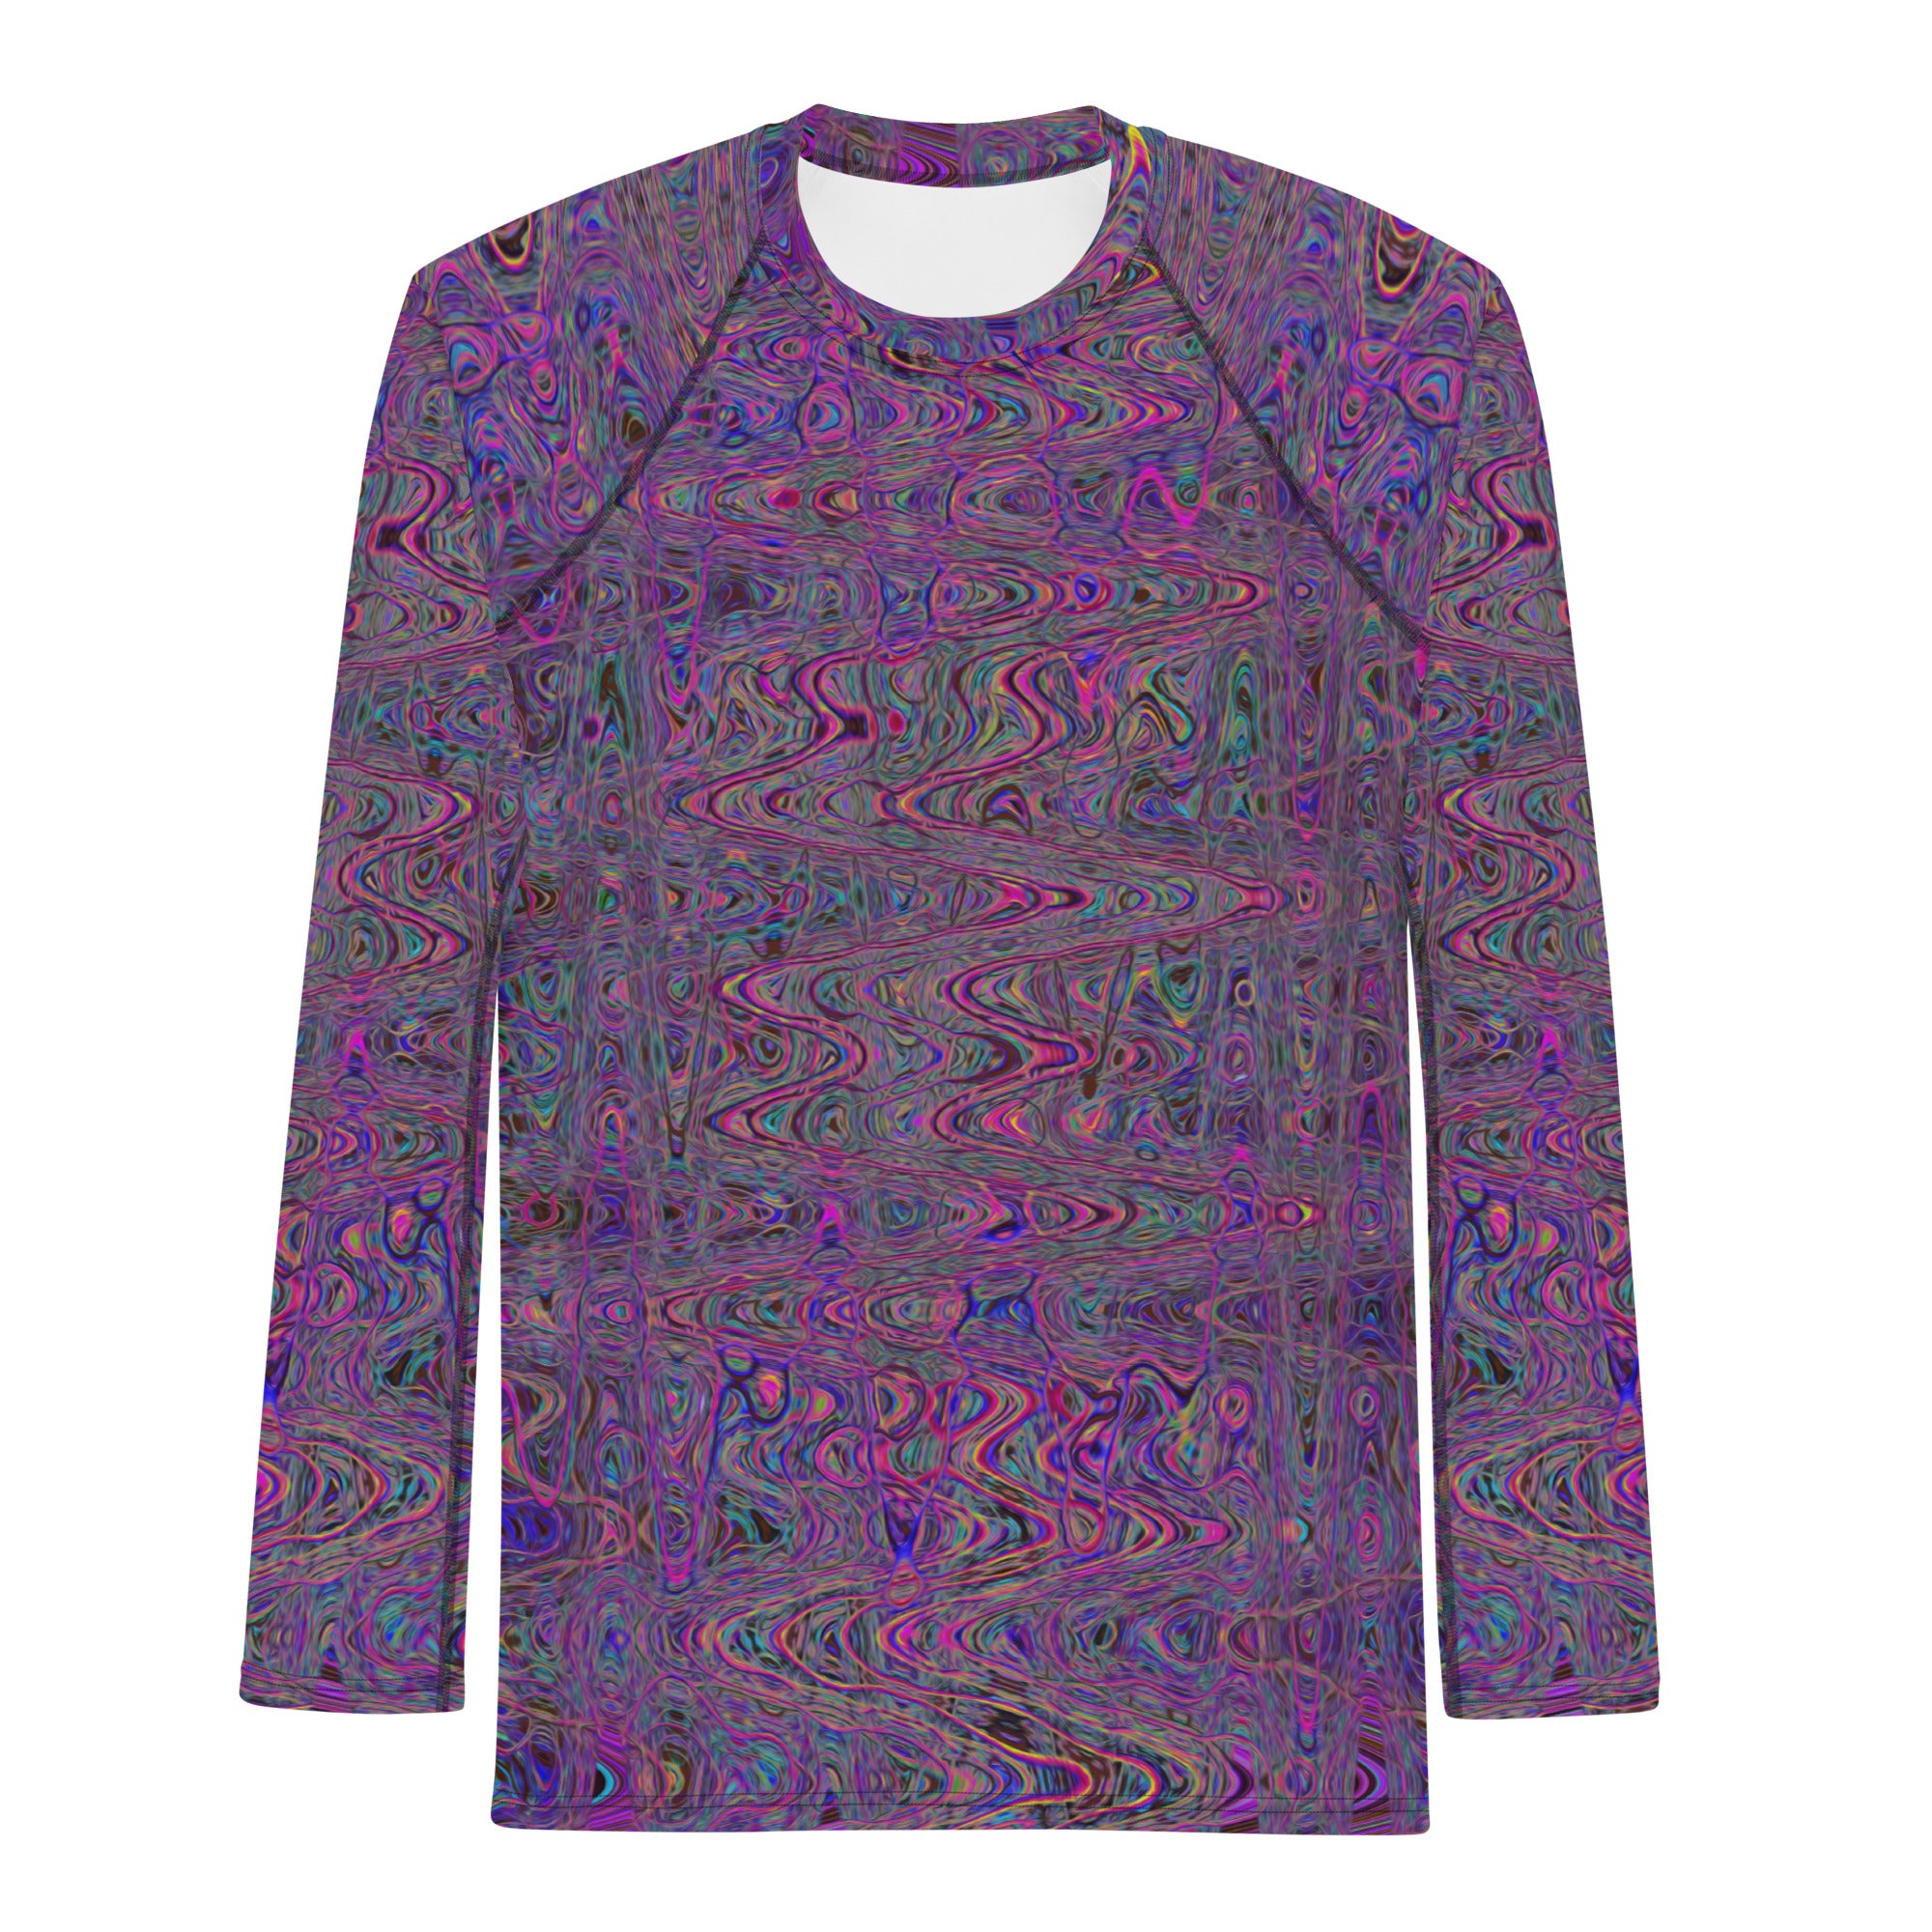 Men's Athletic Rash Guard Shirts | Retro Abstract Magenta and Blue Squiggly Lines